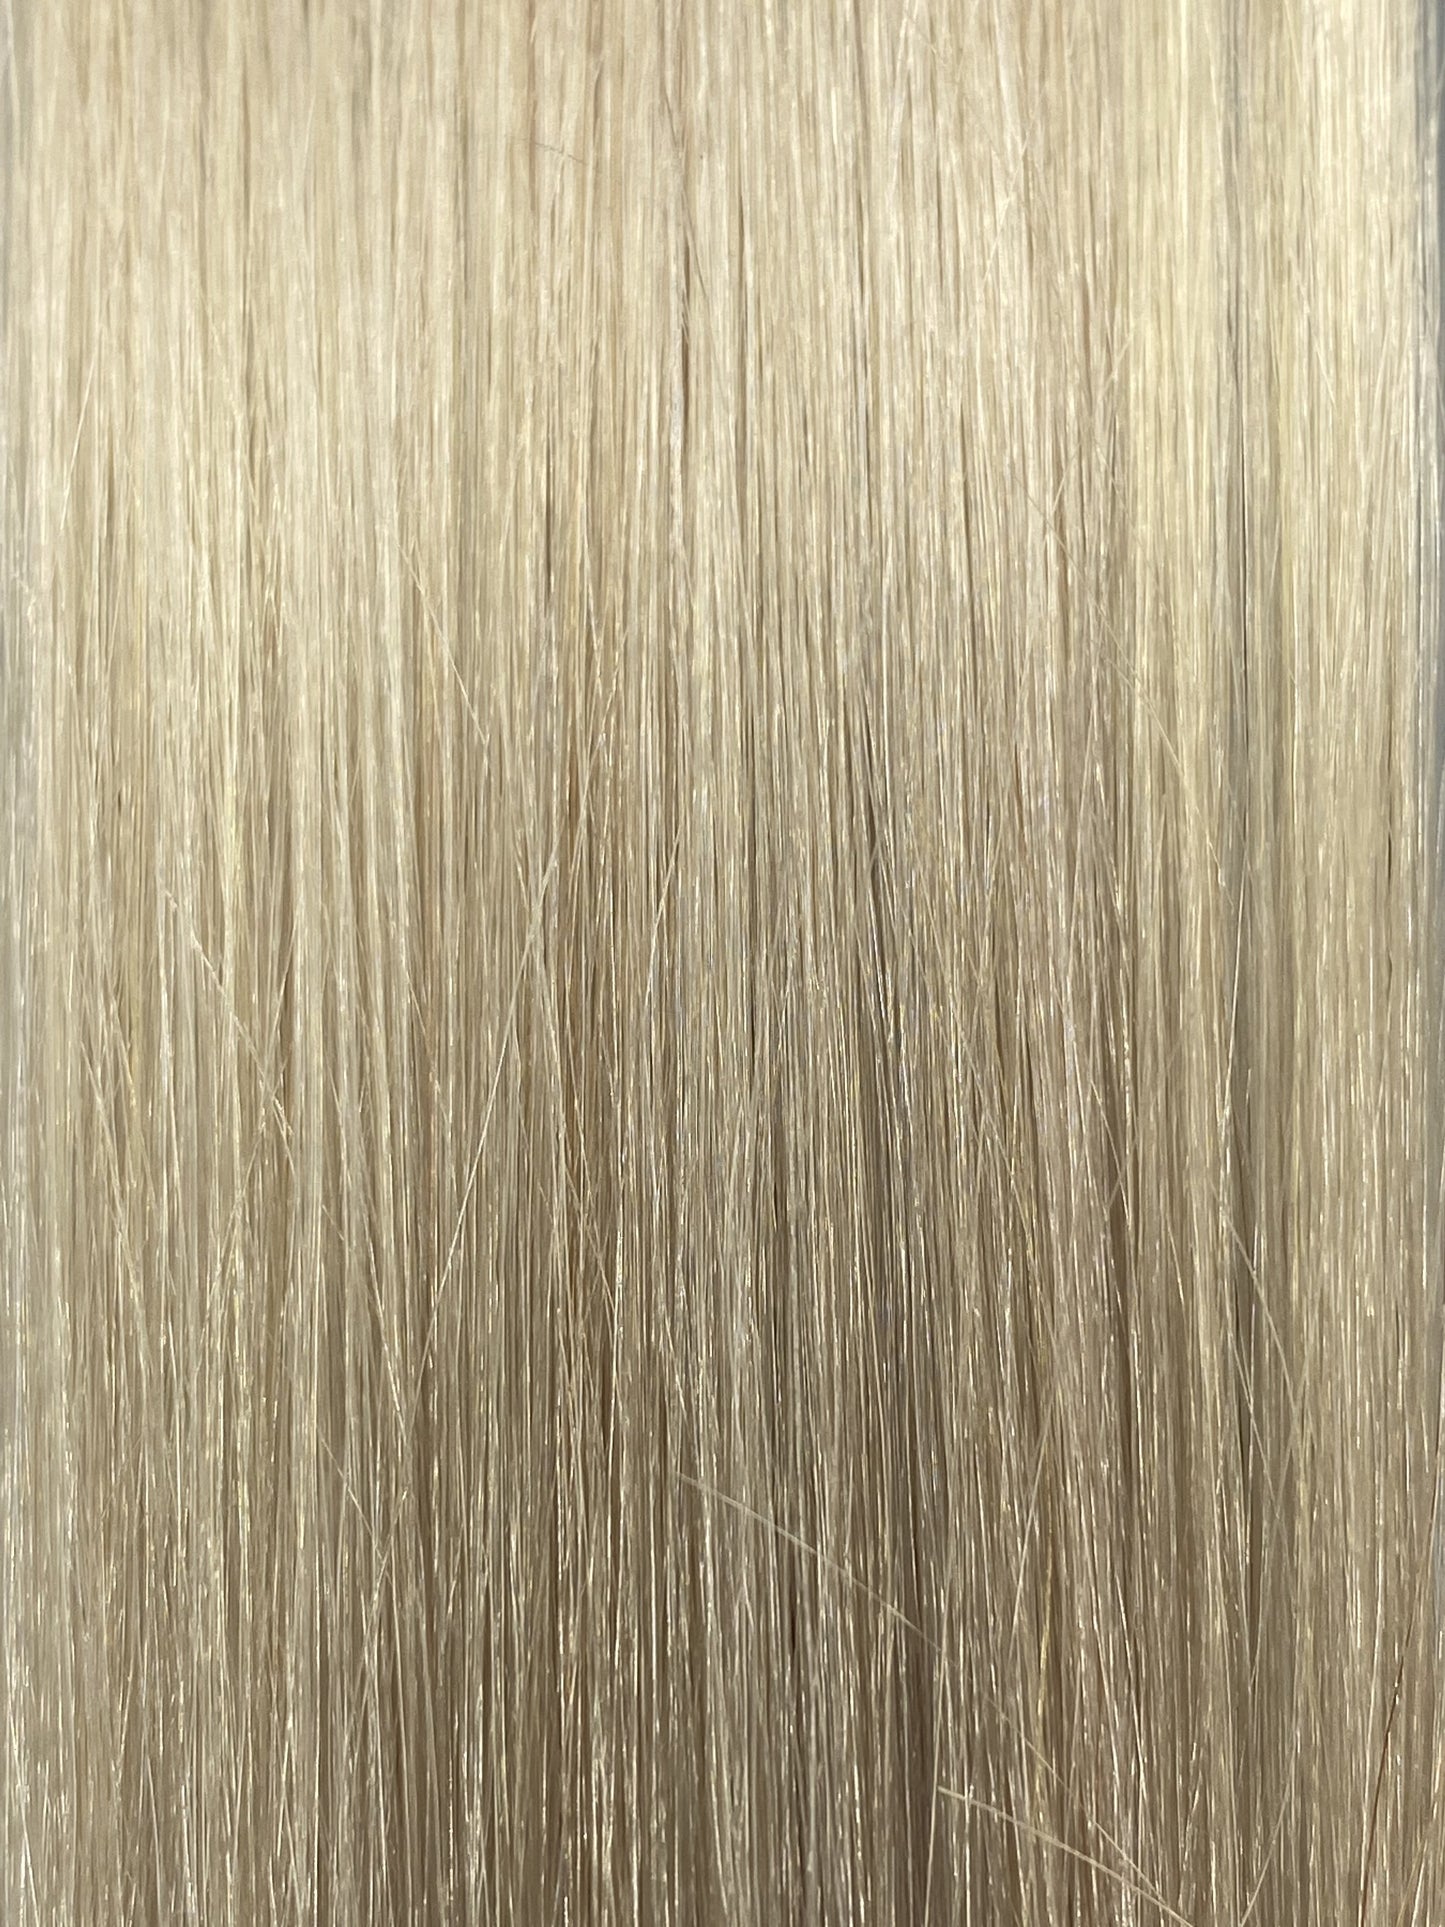 Fusion hair extensions #1004 - 40cm/16 inches - Ultra Very Light Platinum Blonde Fusion 